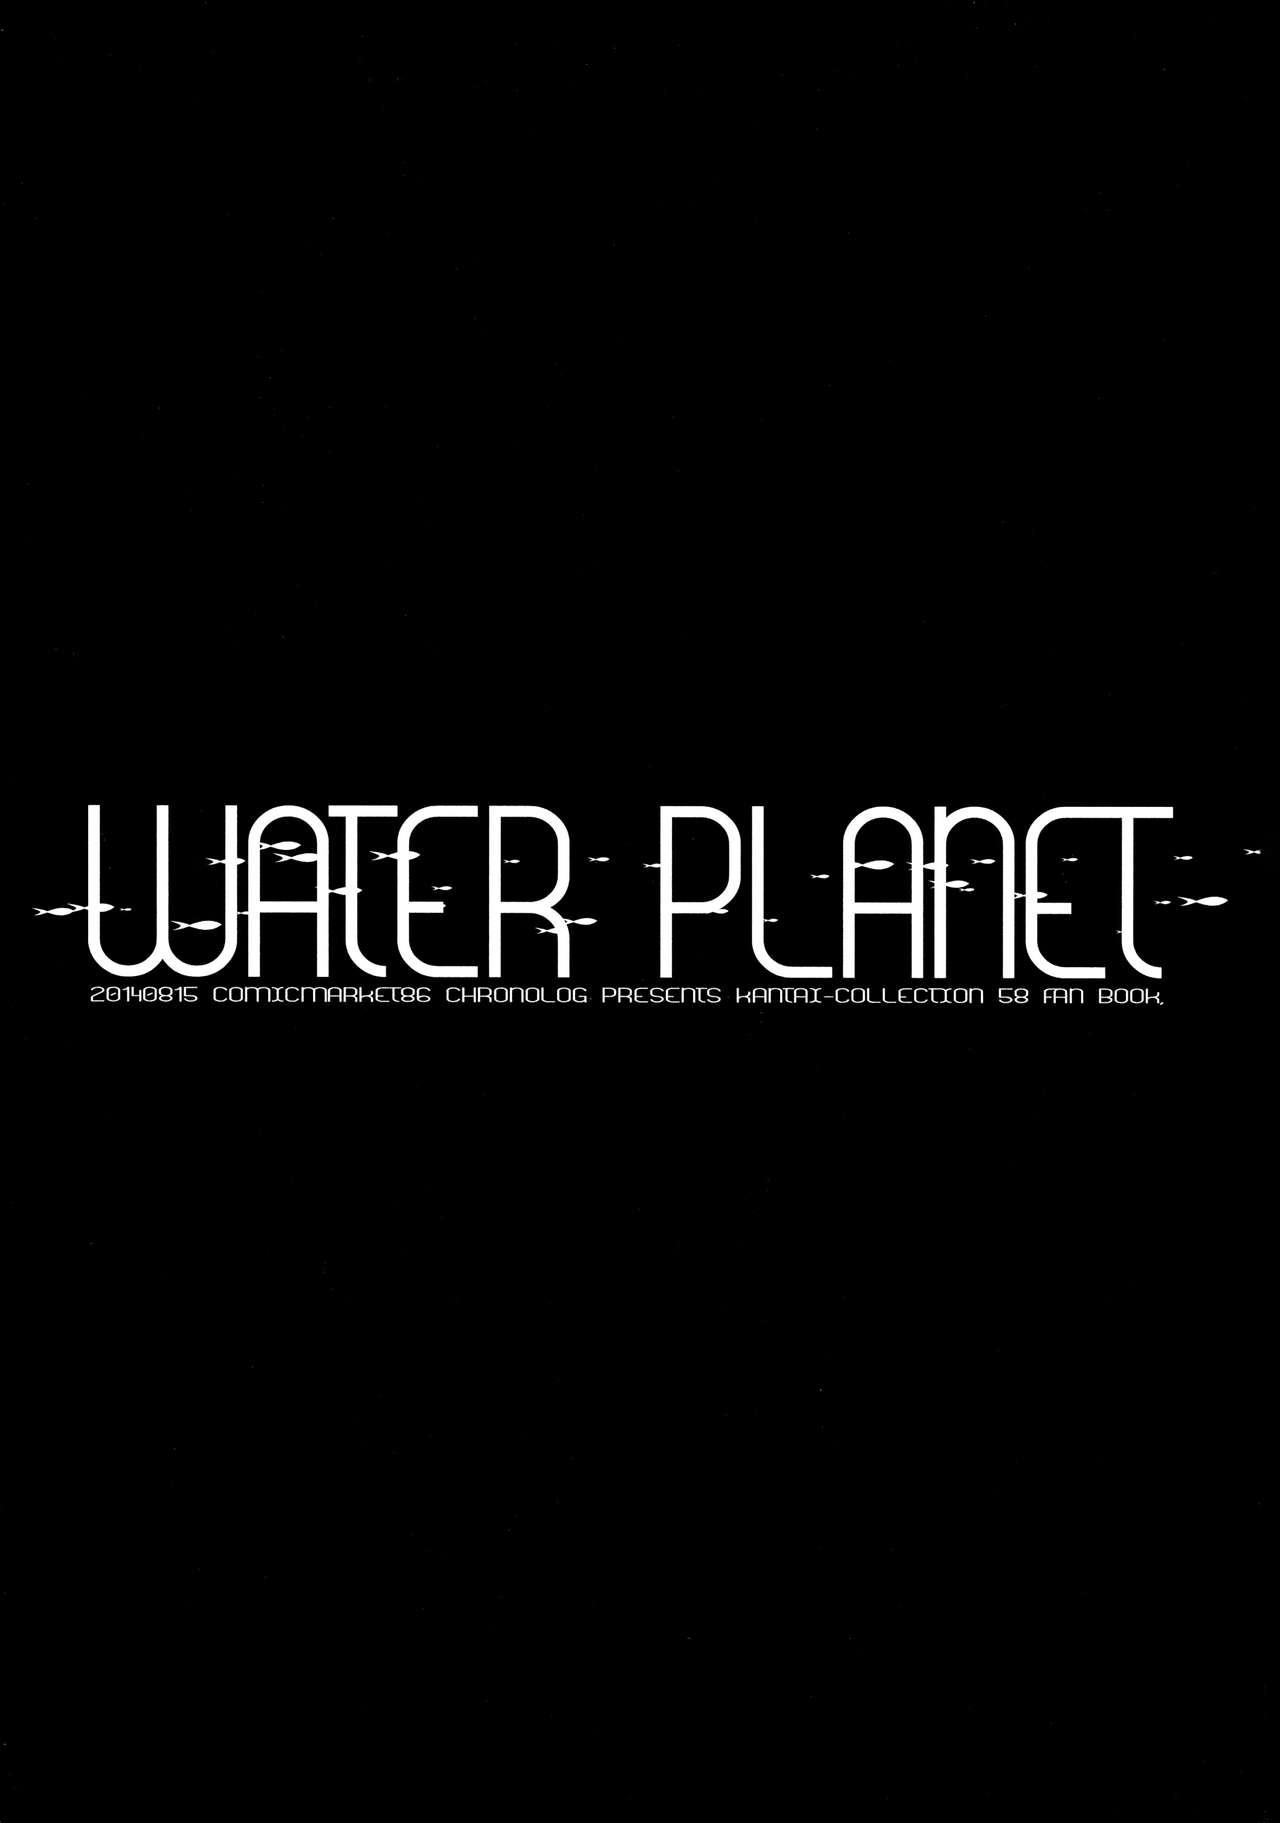 WATER PLANET. 2